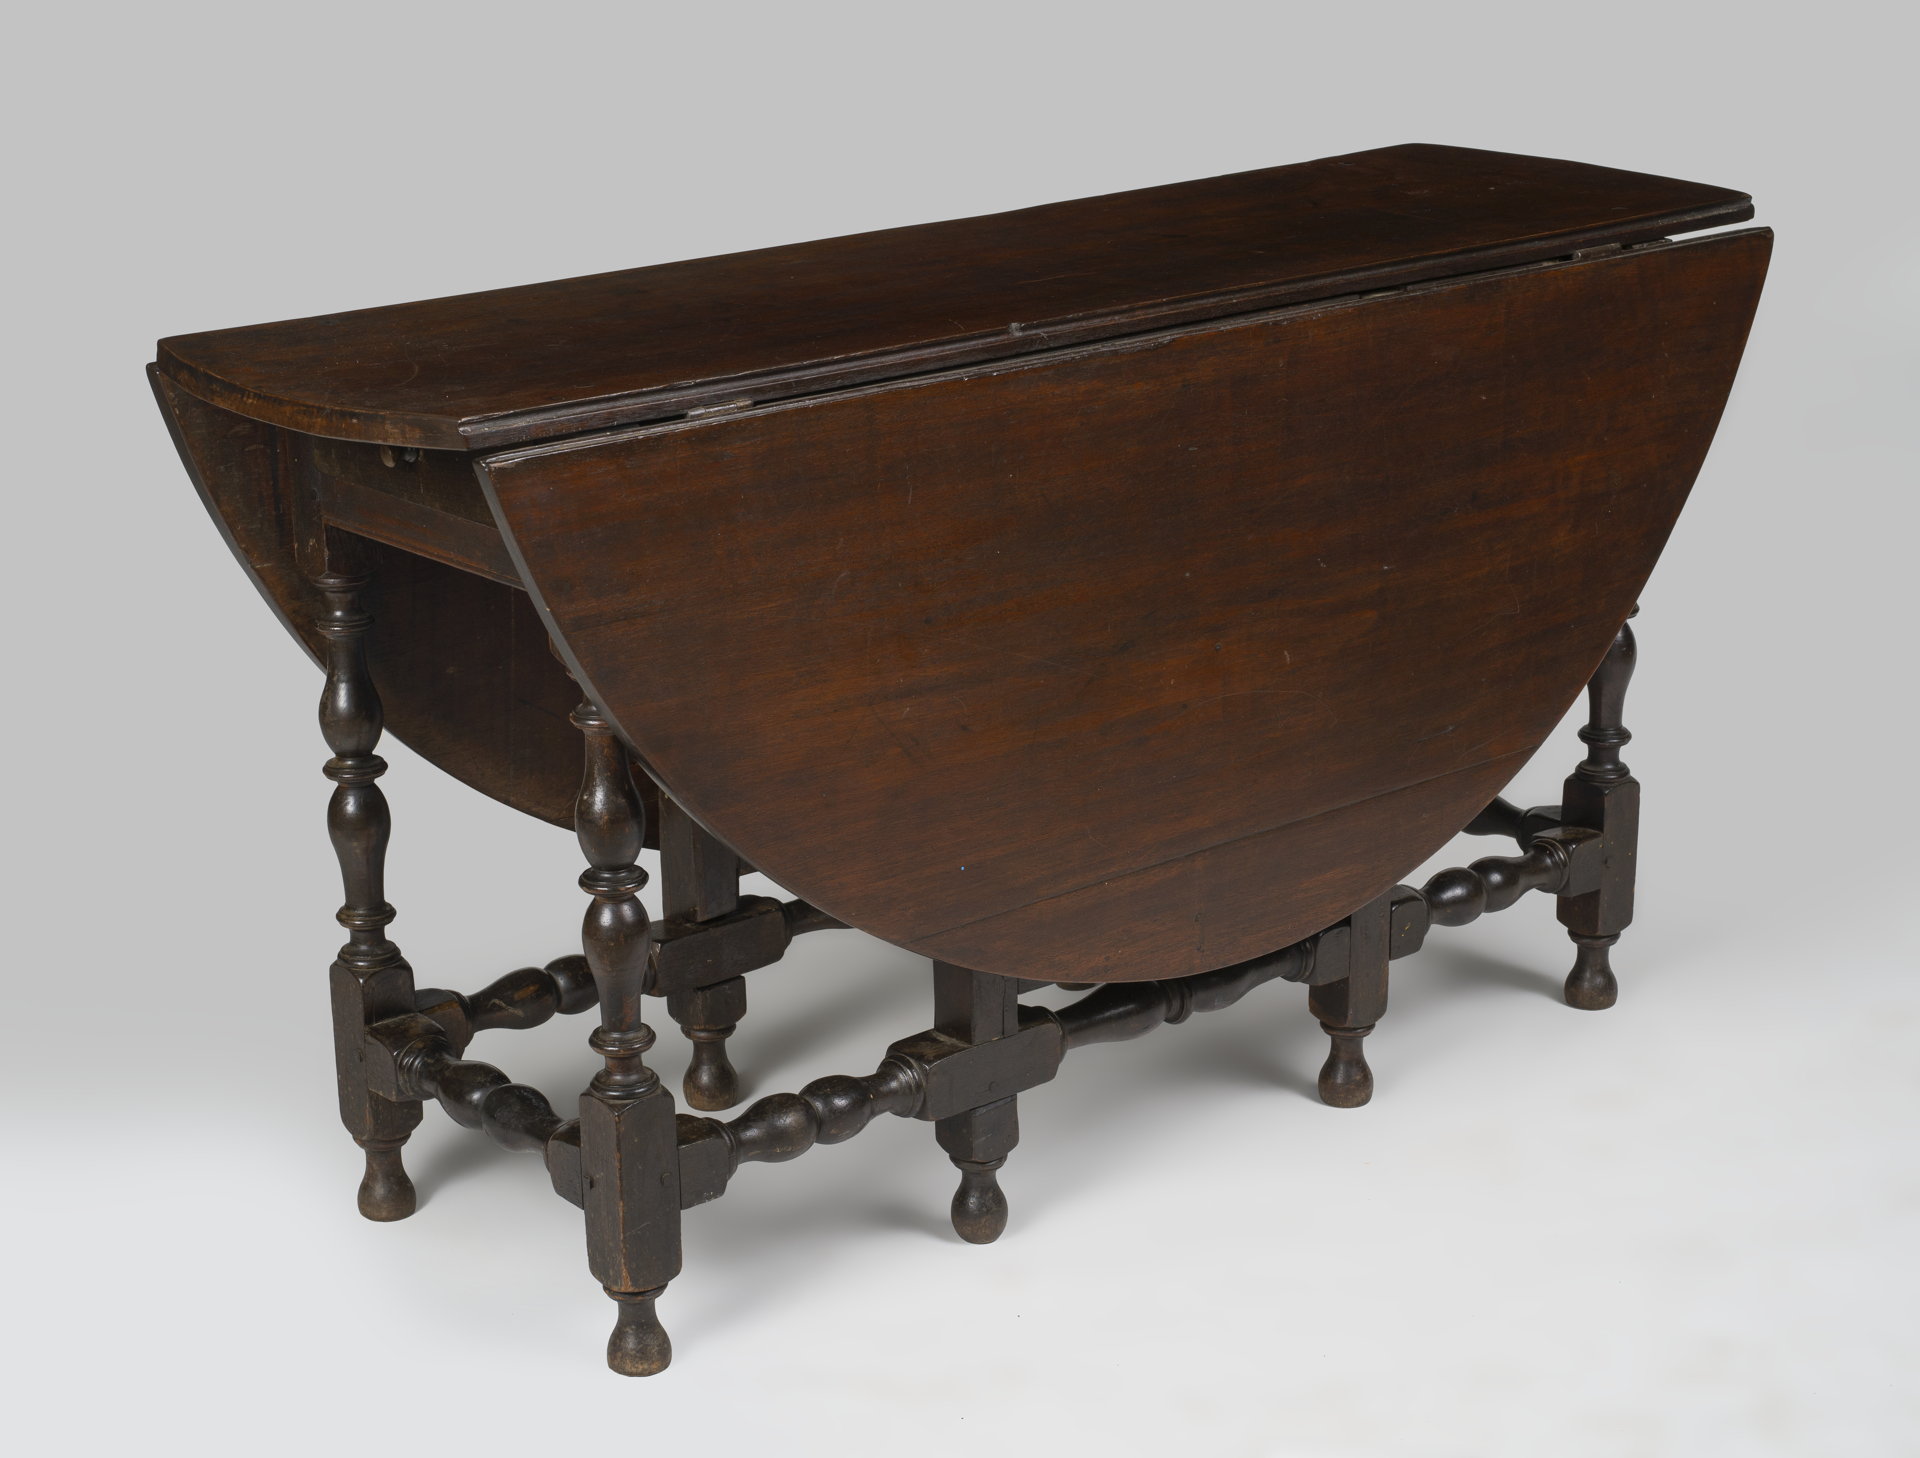 An exceptionally fine William and Mary gate-legged table in a rare large size.